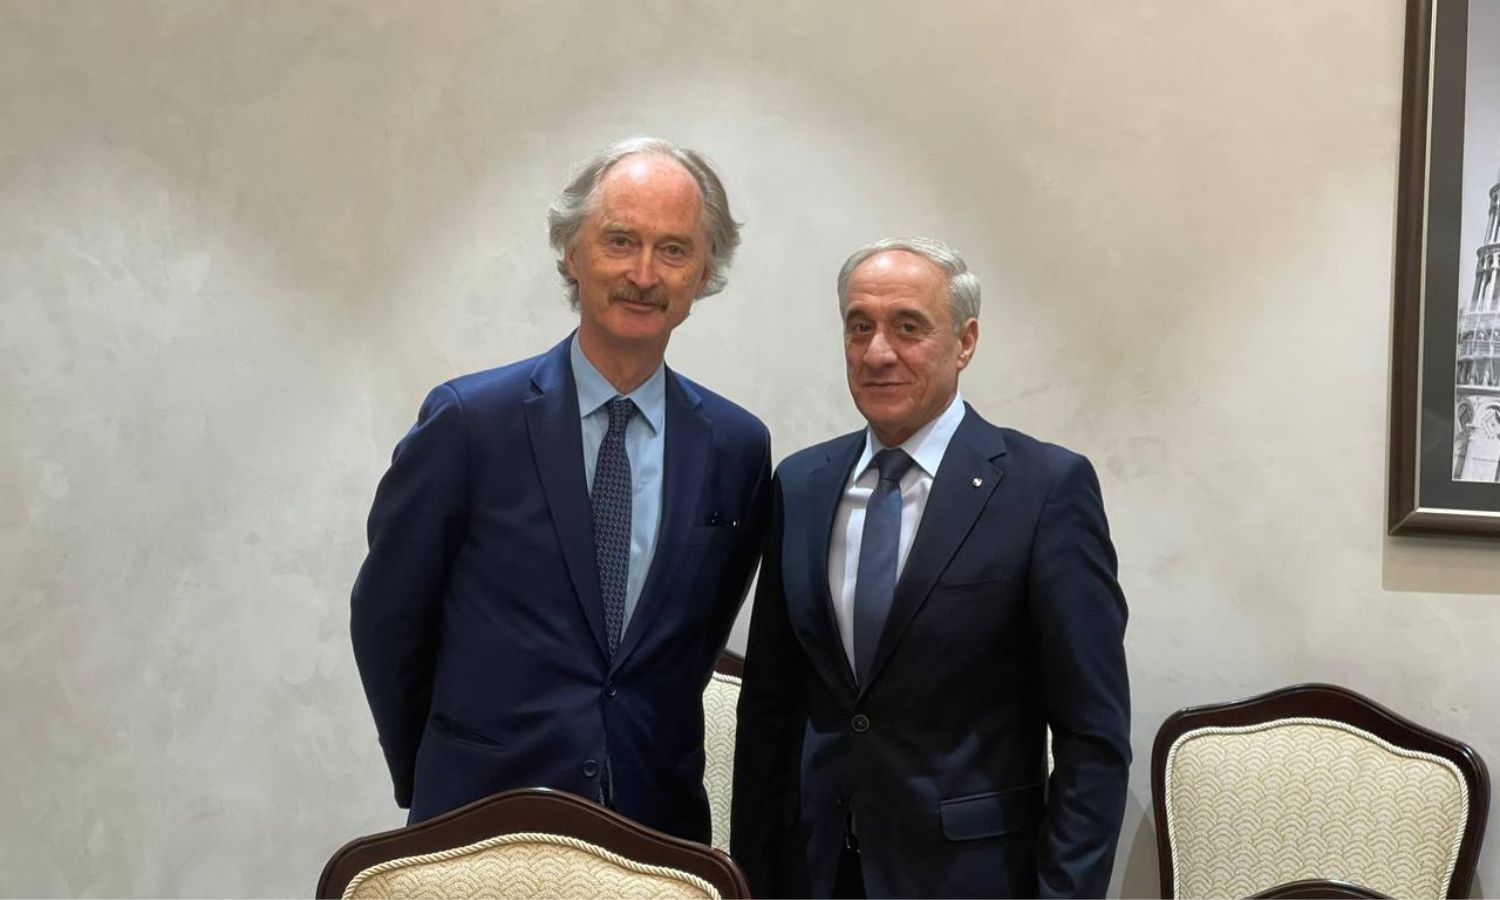 Syrian Deputy Foreign Minister Ayman Soussan meets with the UN envoy to Syria, Geir Pedersen, in Astana - June 20 (Syria’s General Organization of Radio and TV)